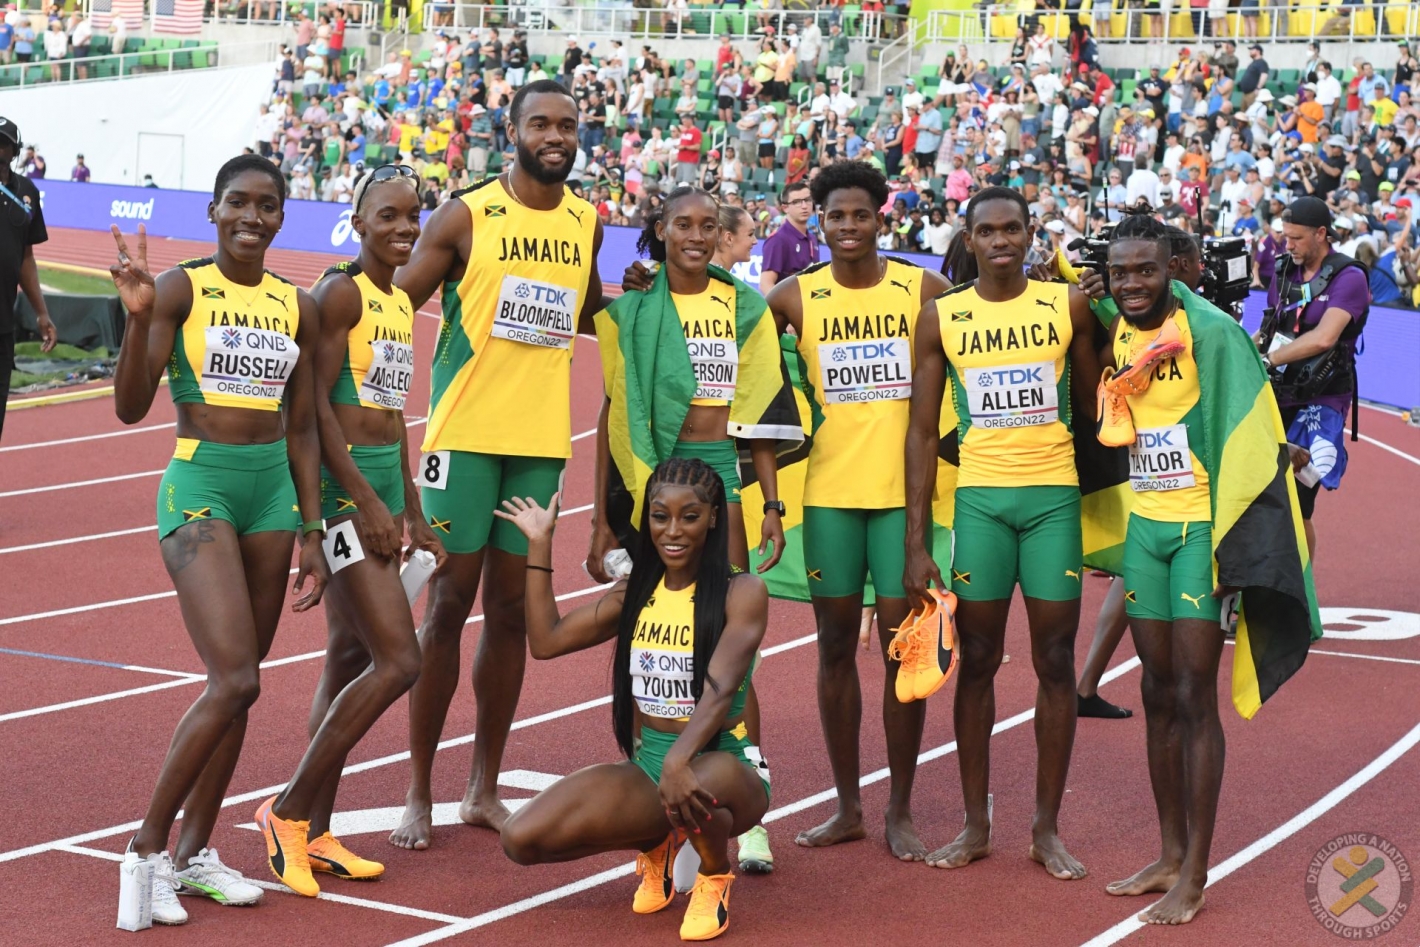 4x400M Men & Women Silver Medalists - All Together